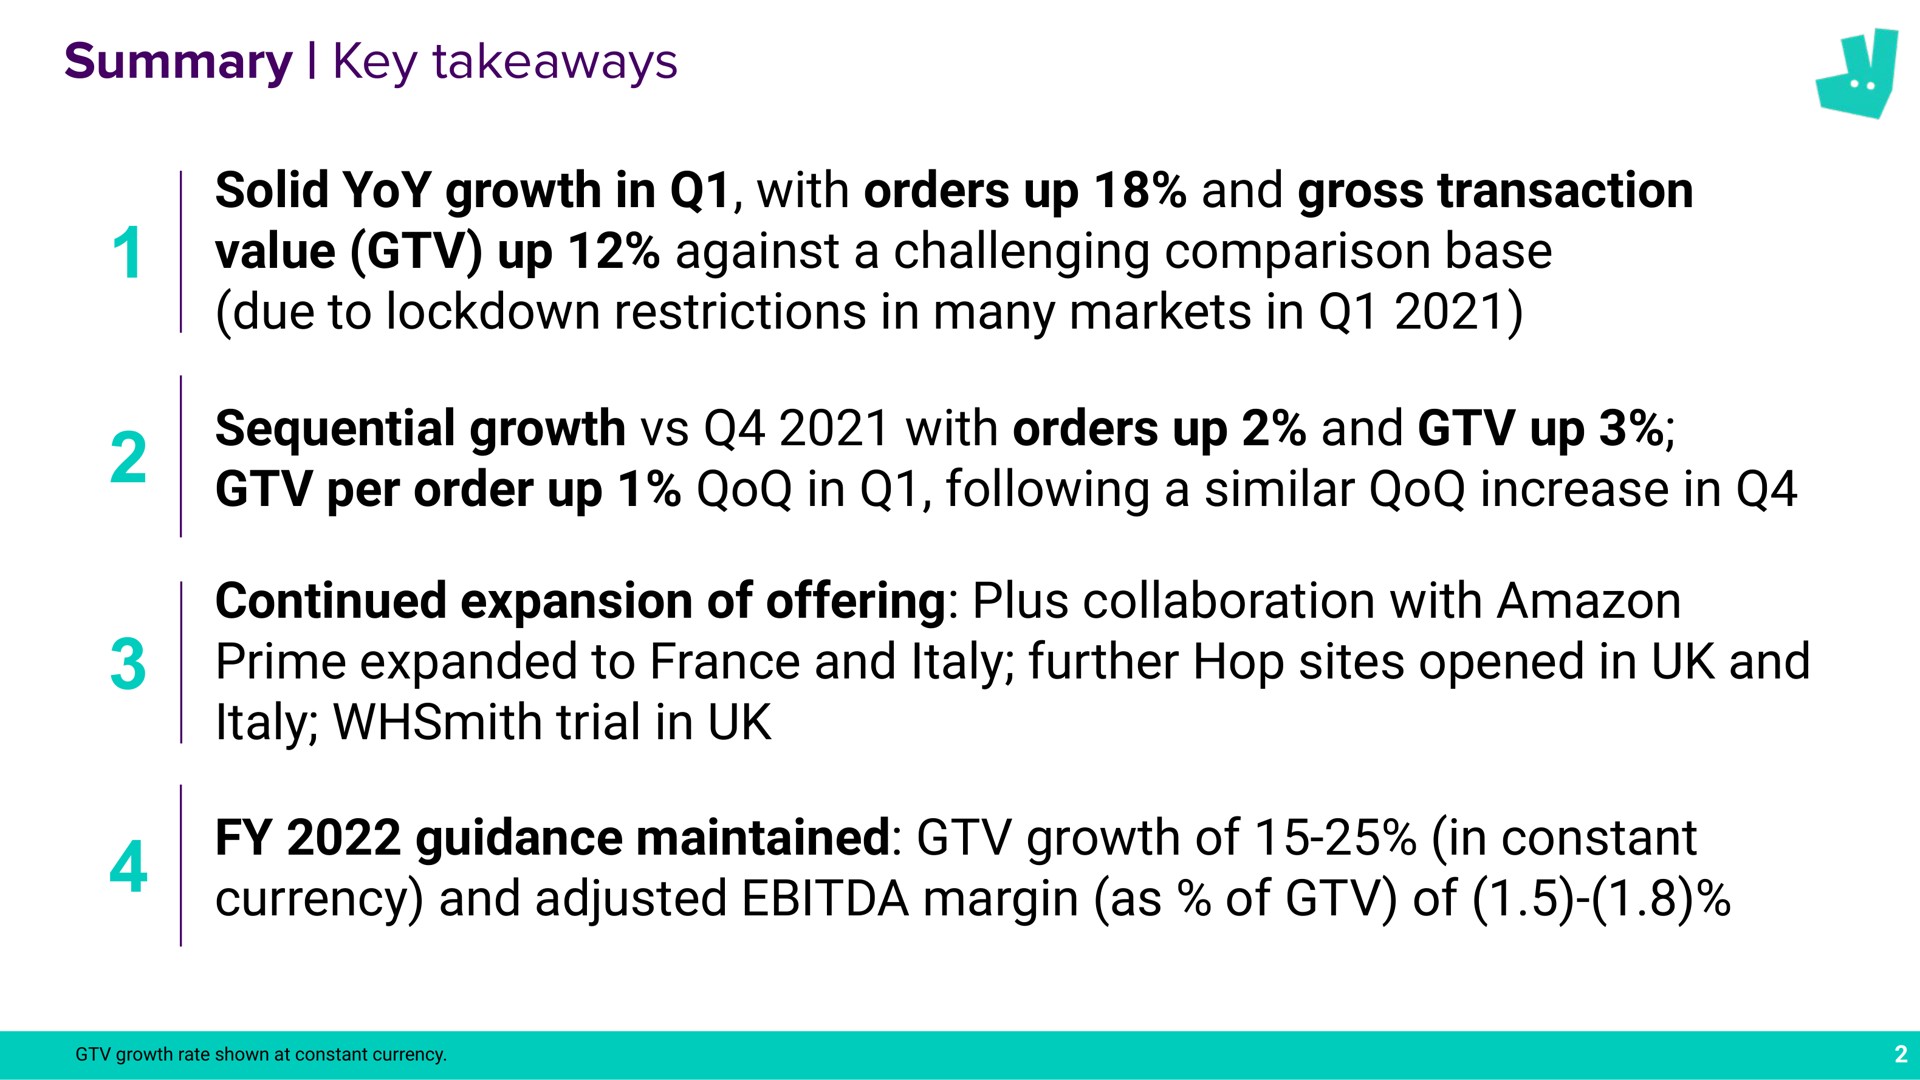 summary key solid yoy growth in with orders up and gross transaction value up against a challenging comparison base due to restrictions in many markets in sequential growth with orders up and up per order up in following a similar increase in continued expansion of offering plus collaboration with prime expanded to and further hop sites opened in and trial in guidance maintained growth of in constant currency and adjusted margin as of of | Deliveroo